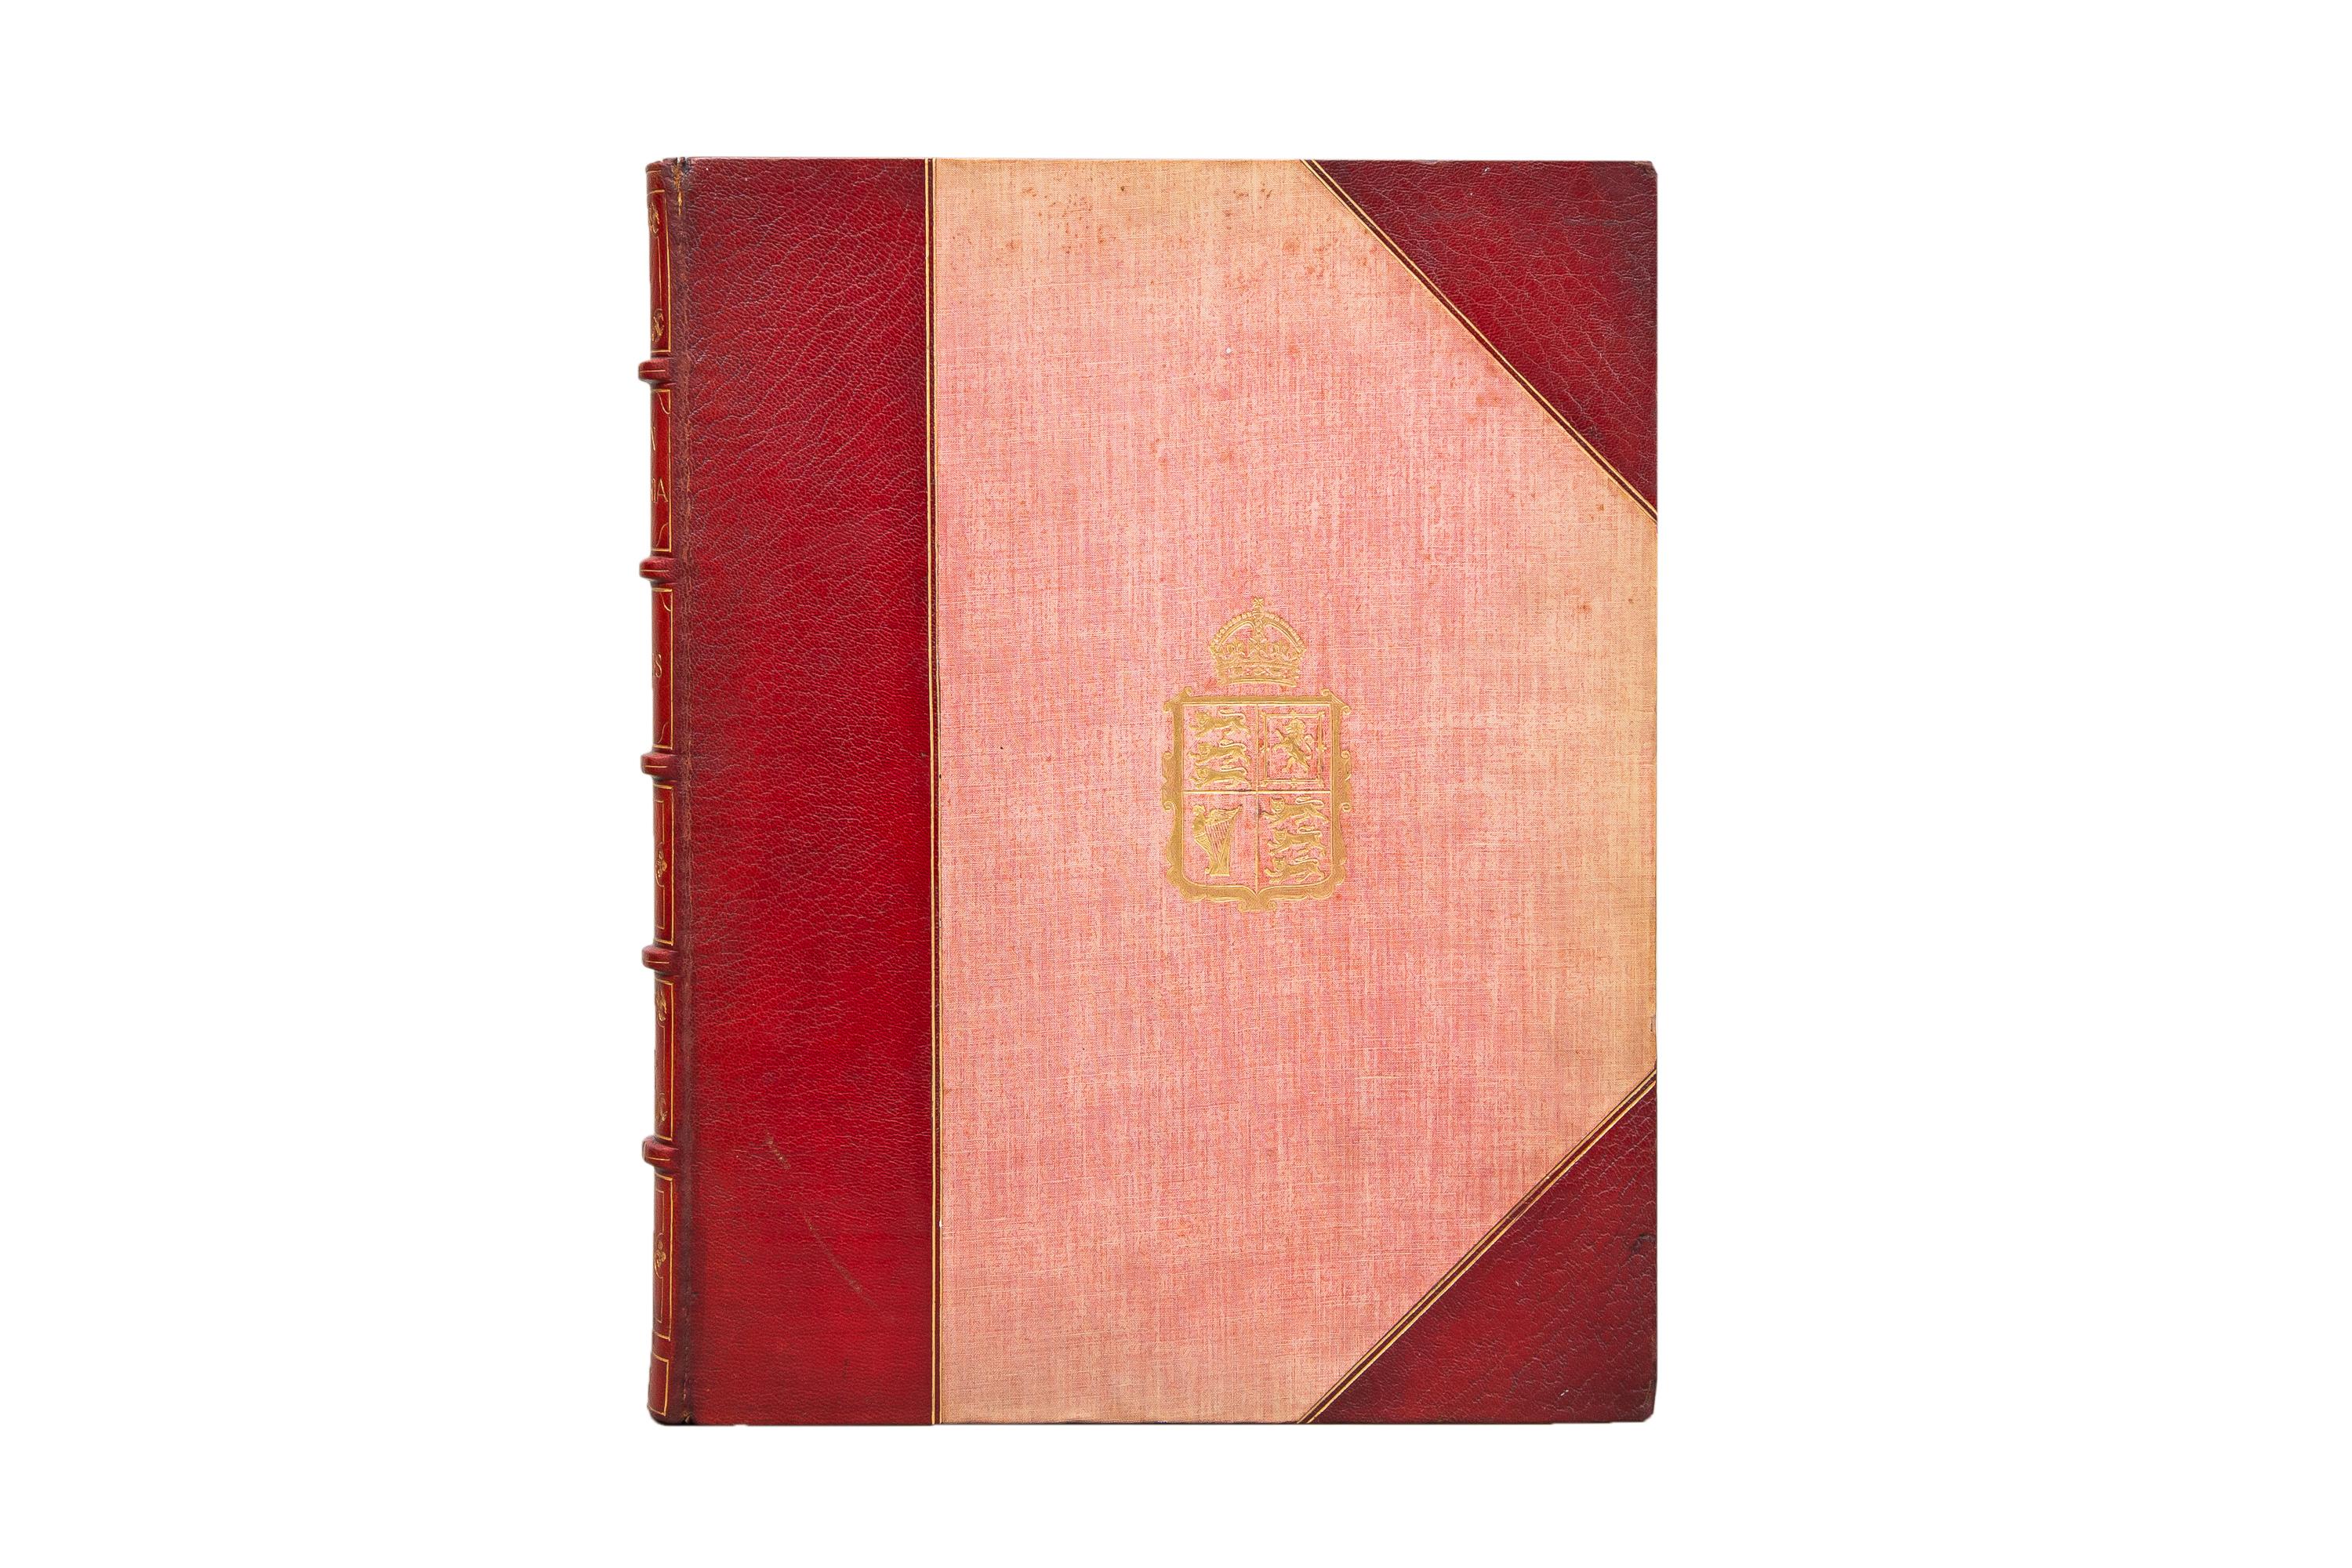 1 Volume. Richard R. Holmes, Queen Victoria. Bound in 3/4 wine morocco and linen boards. The cover displays a crest in gilt. Raised band spine with panels displaying gilt royal detailing and label lettering. The top edge is gilt with marbled